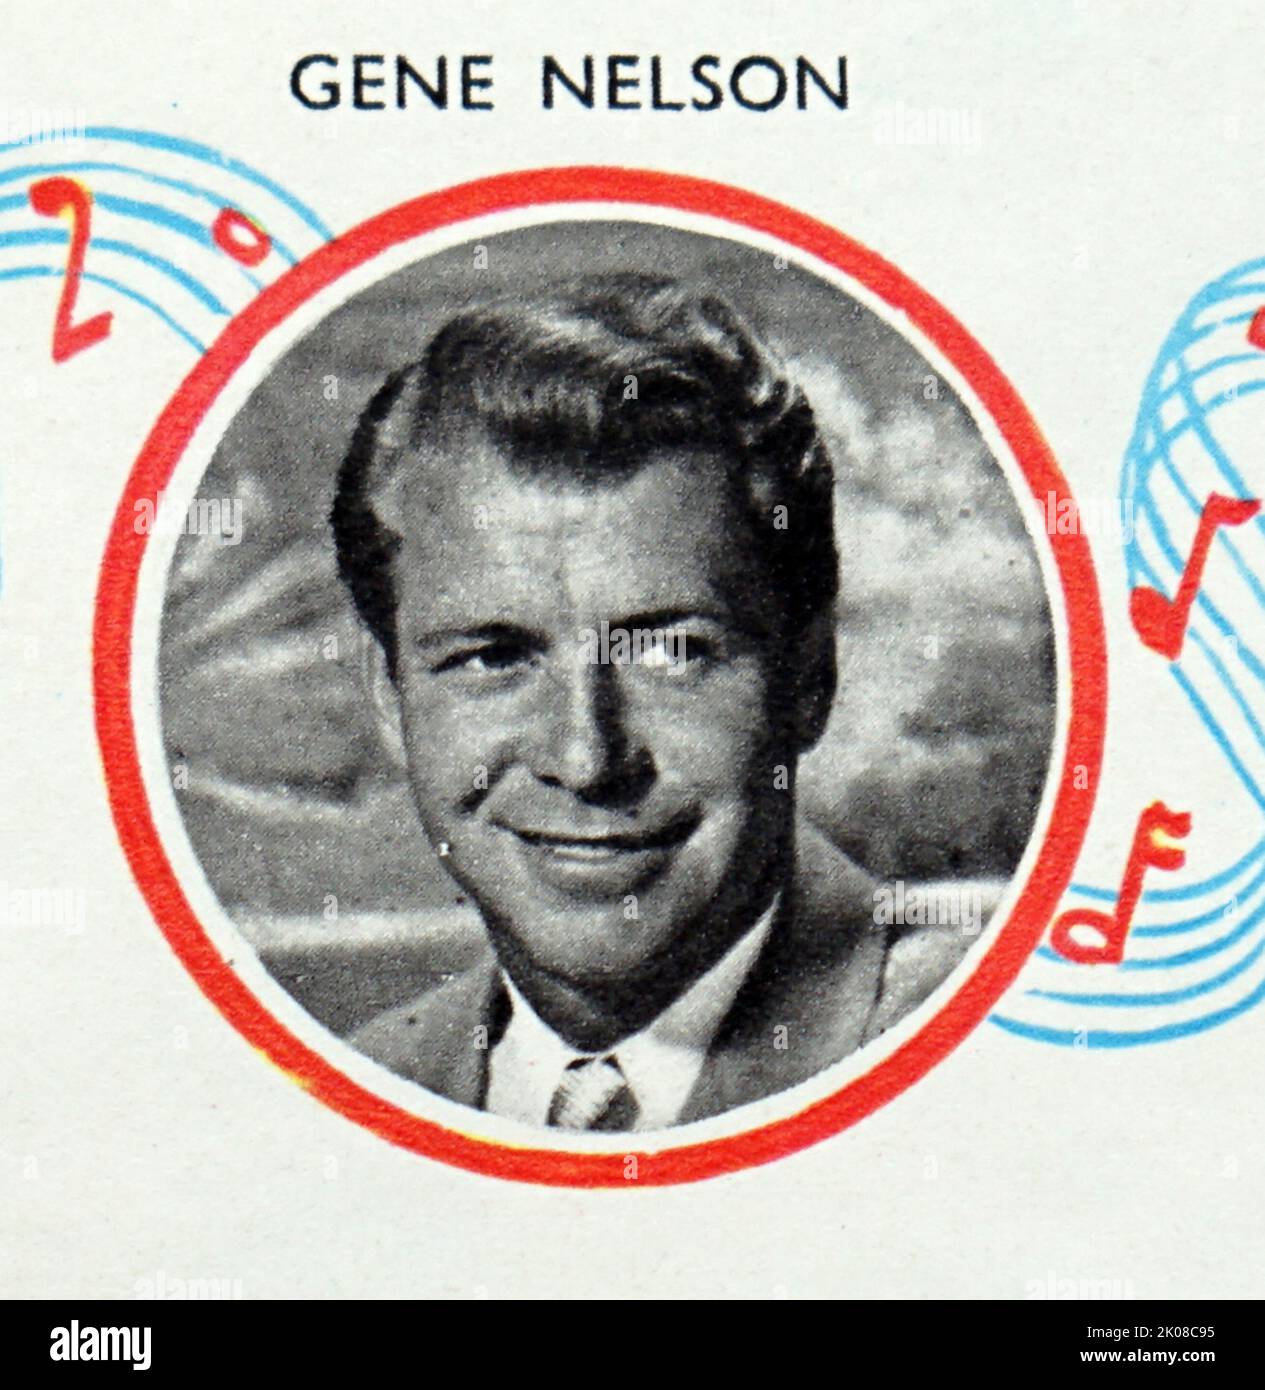 Gene Nelson (born Leander Eugene Berg; March 24, 1920 - September 16, 1996) was an American actor, dancer, screenwriter, and director Stock Photo